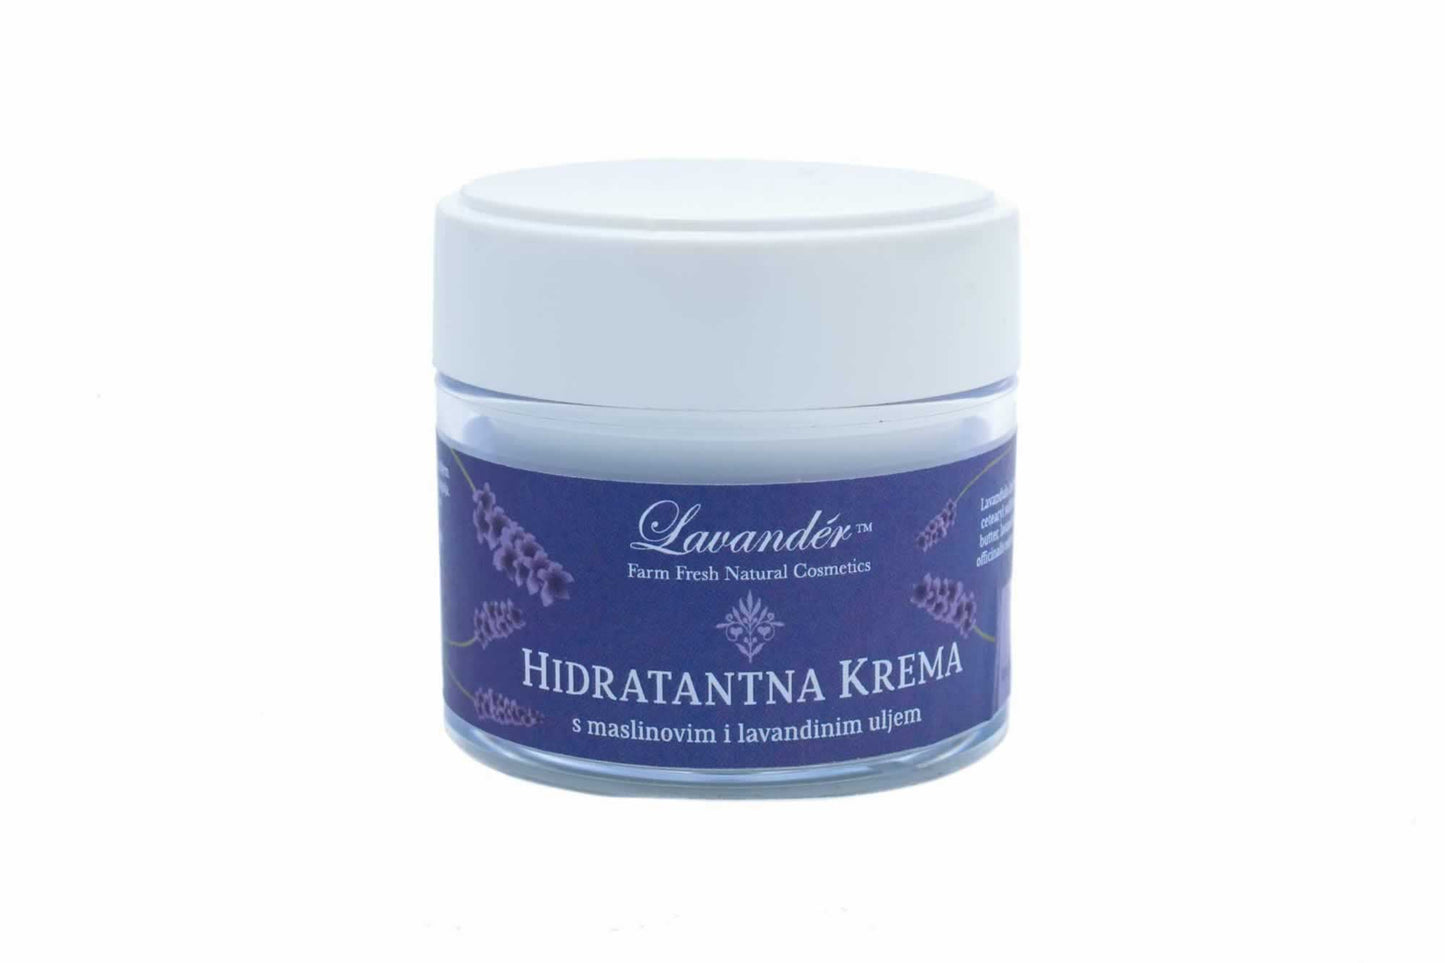 Moisturizing cream with lavender, almond and shea butter